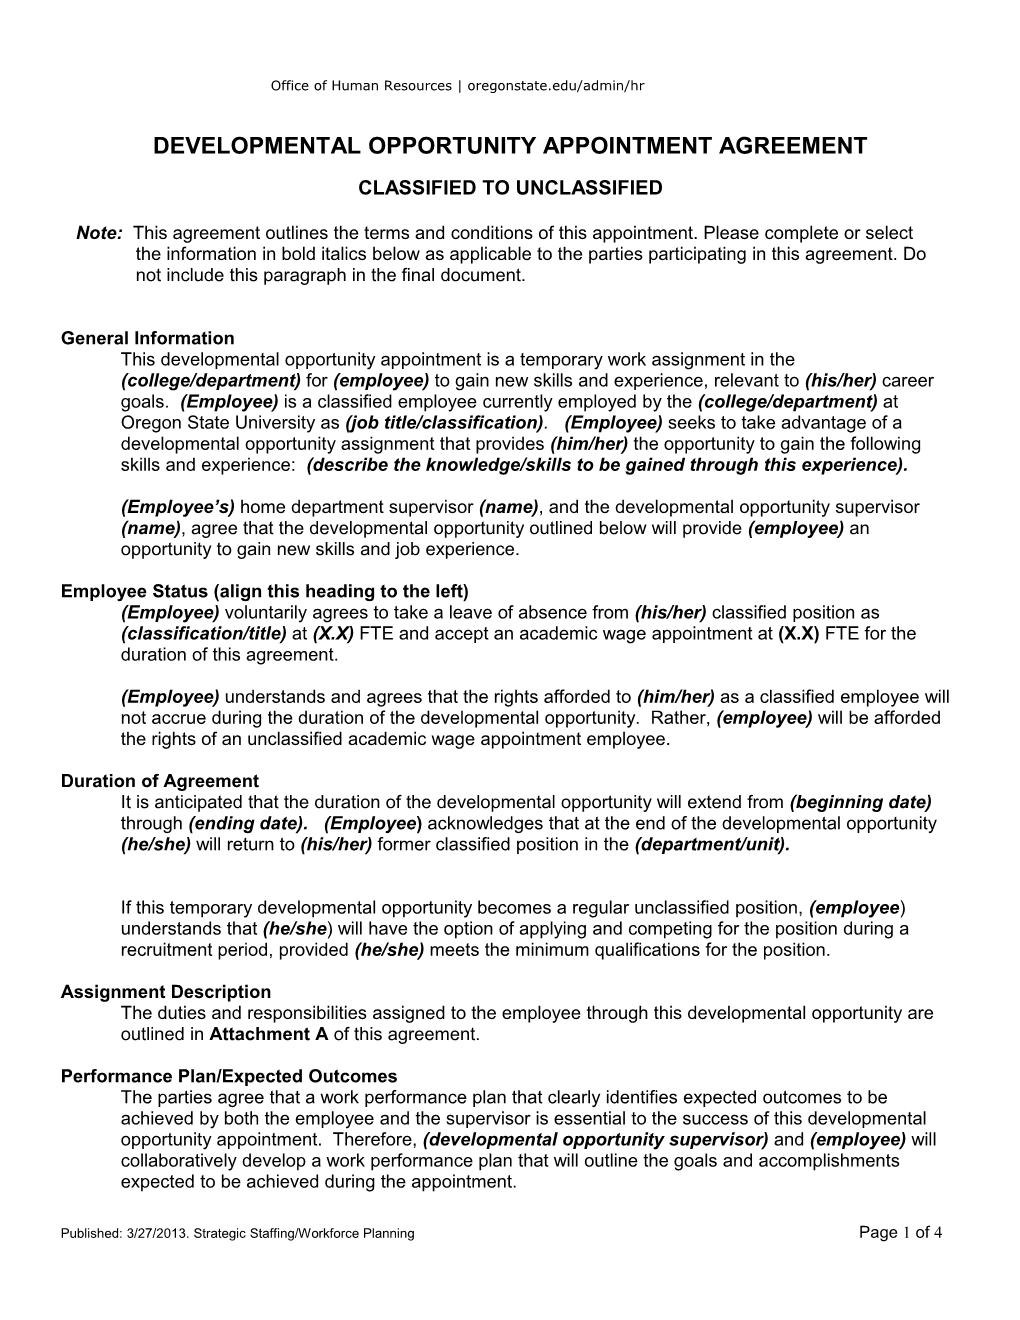 Developmental Opportunity Appointment Agreement, Classified to Unclassified